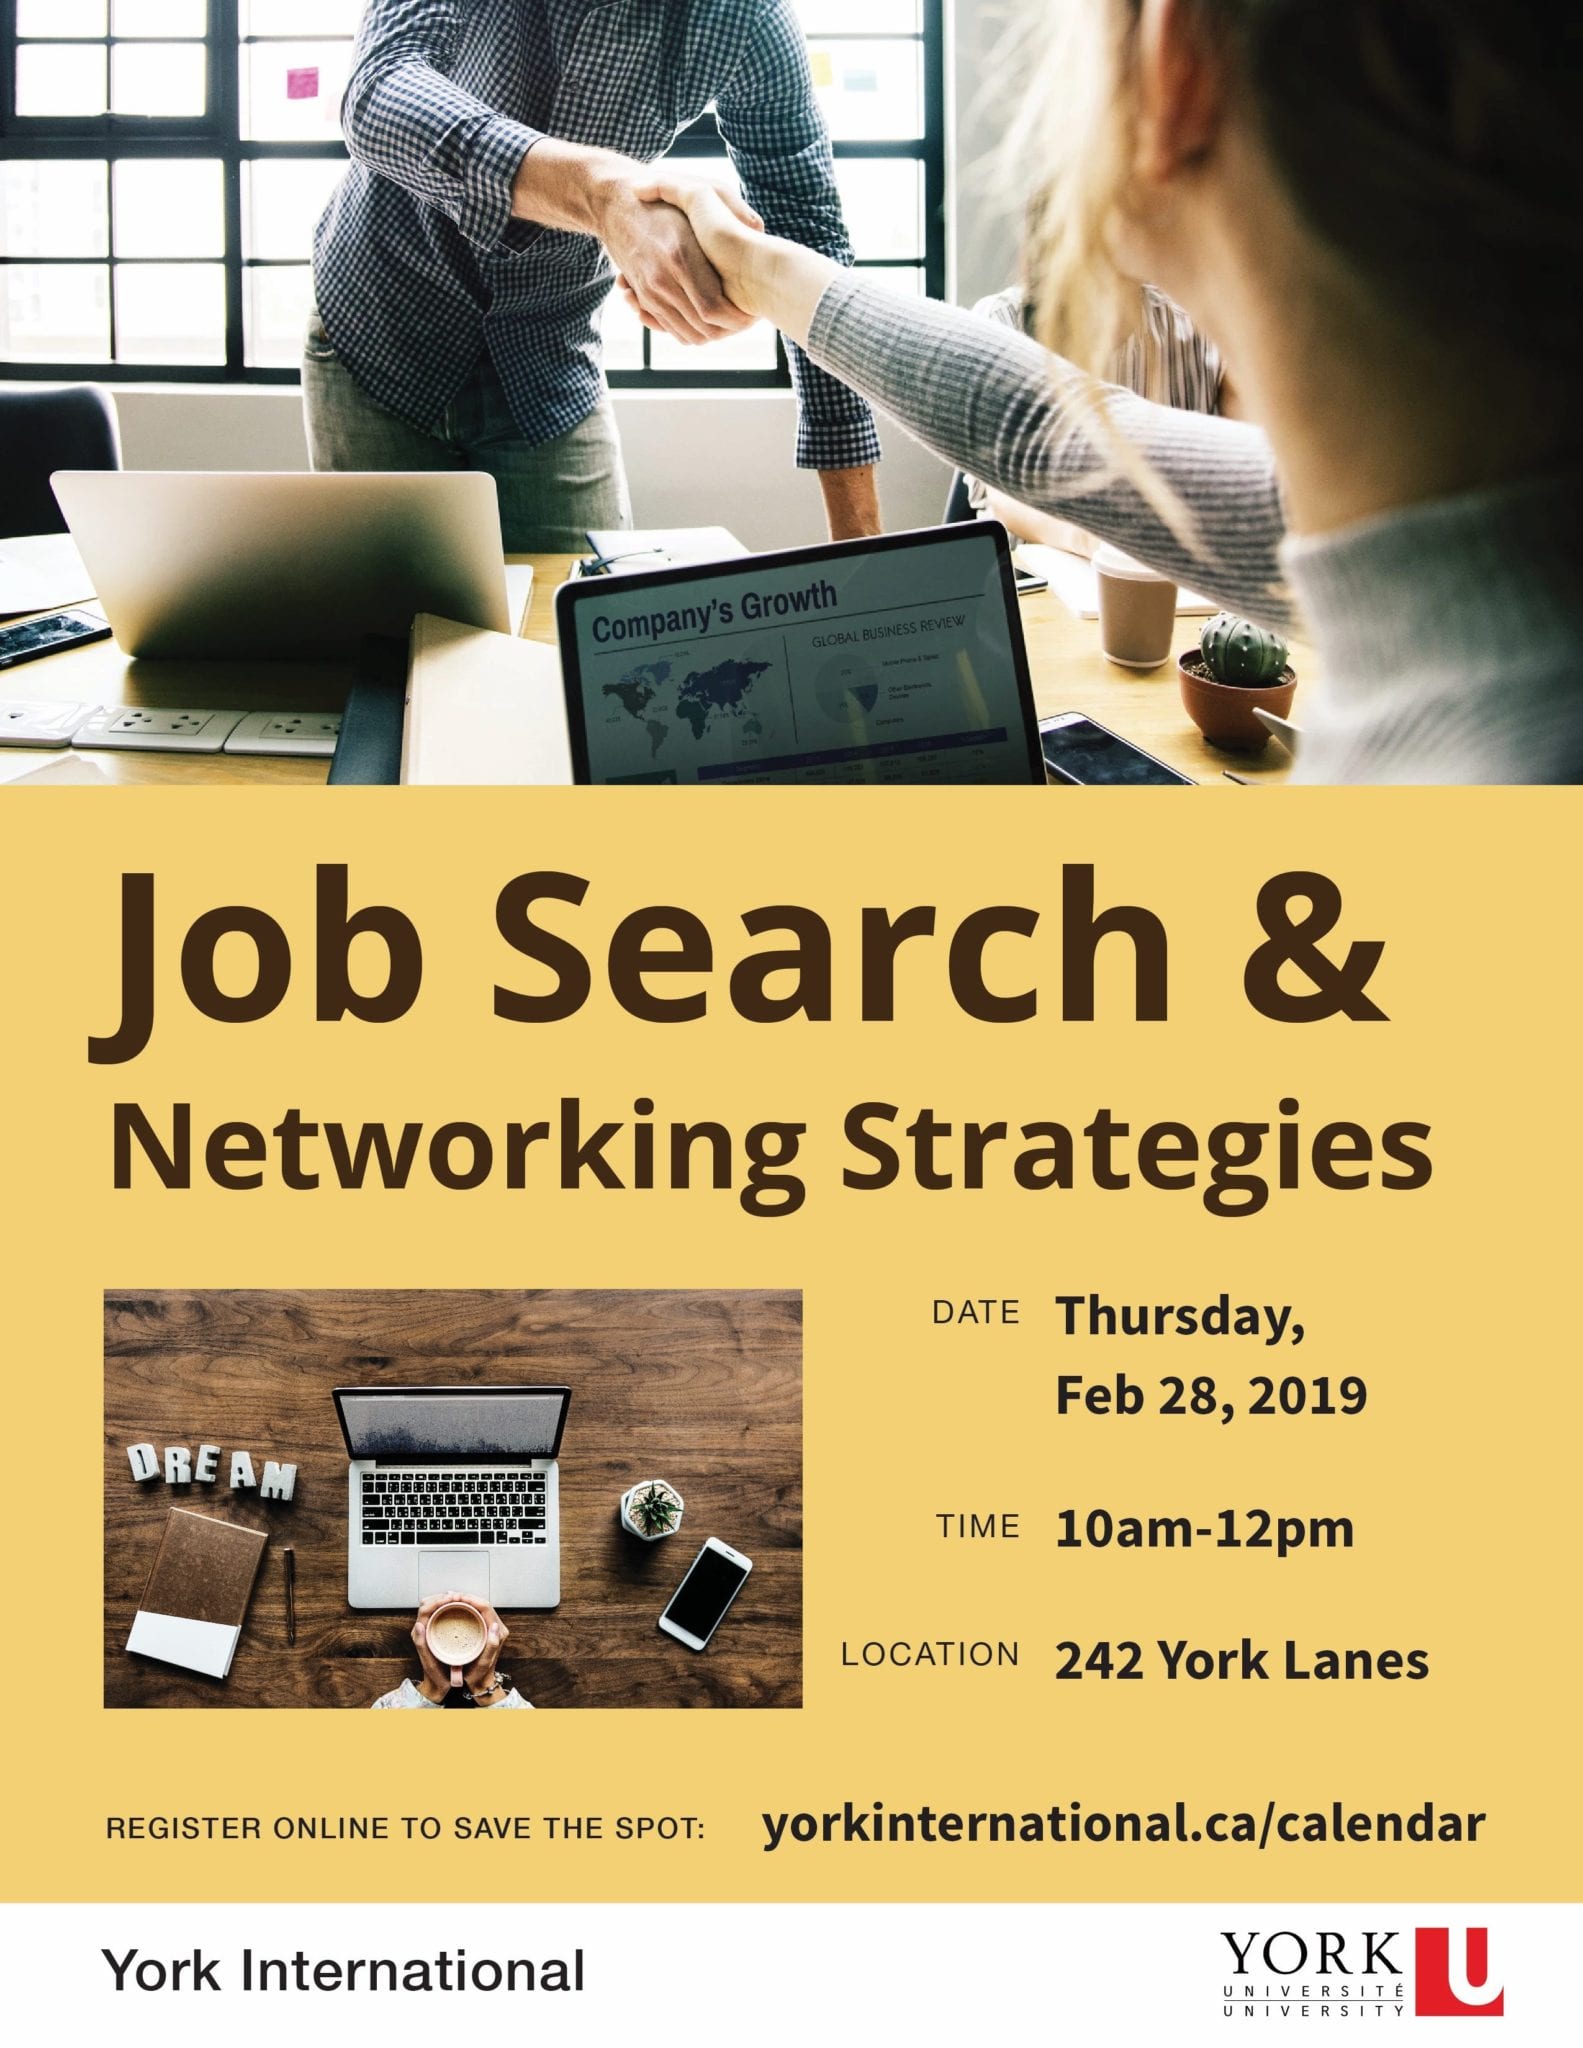 Importance of networking in job search